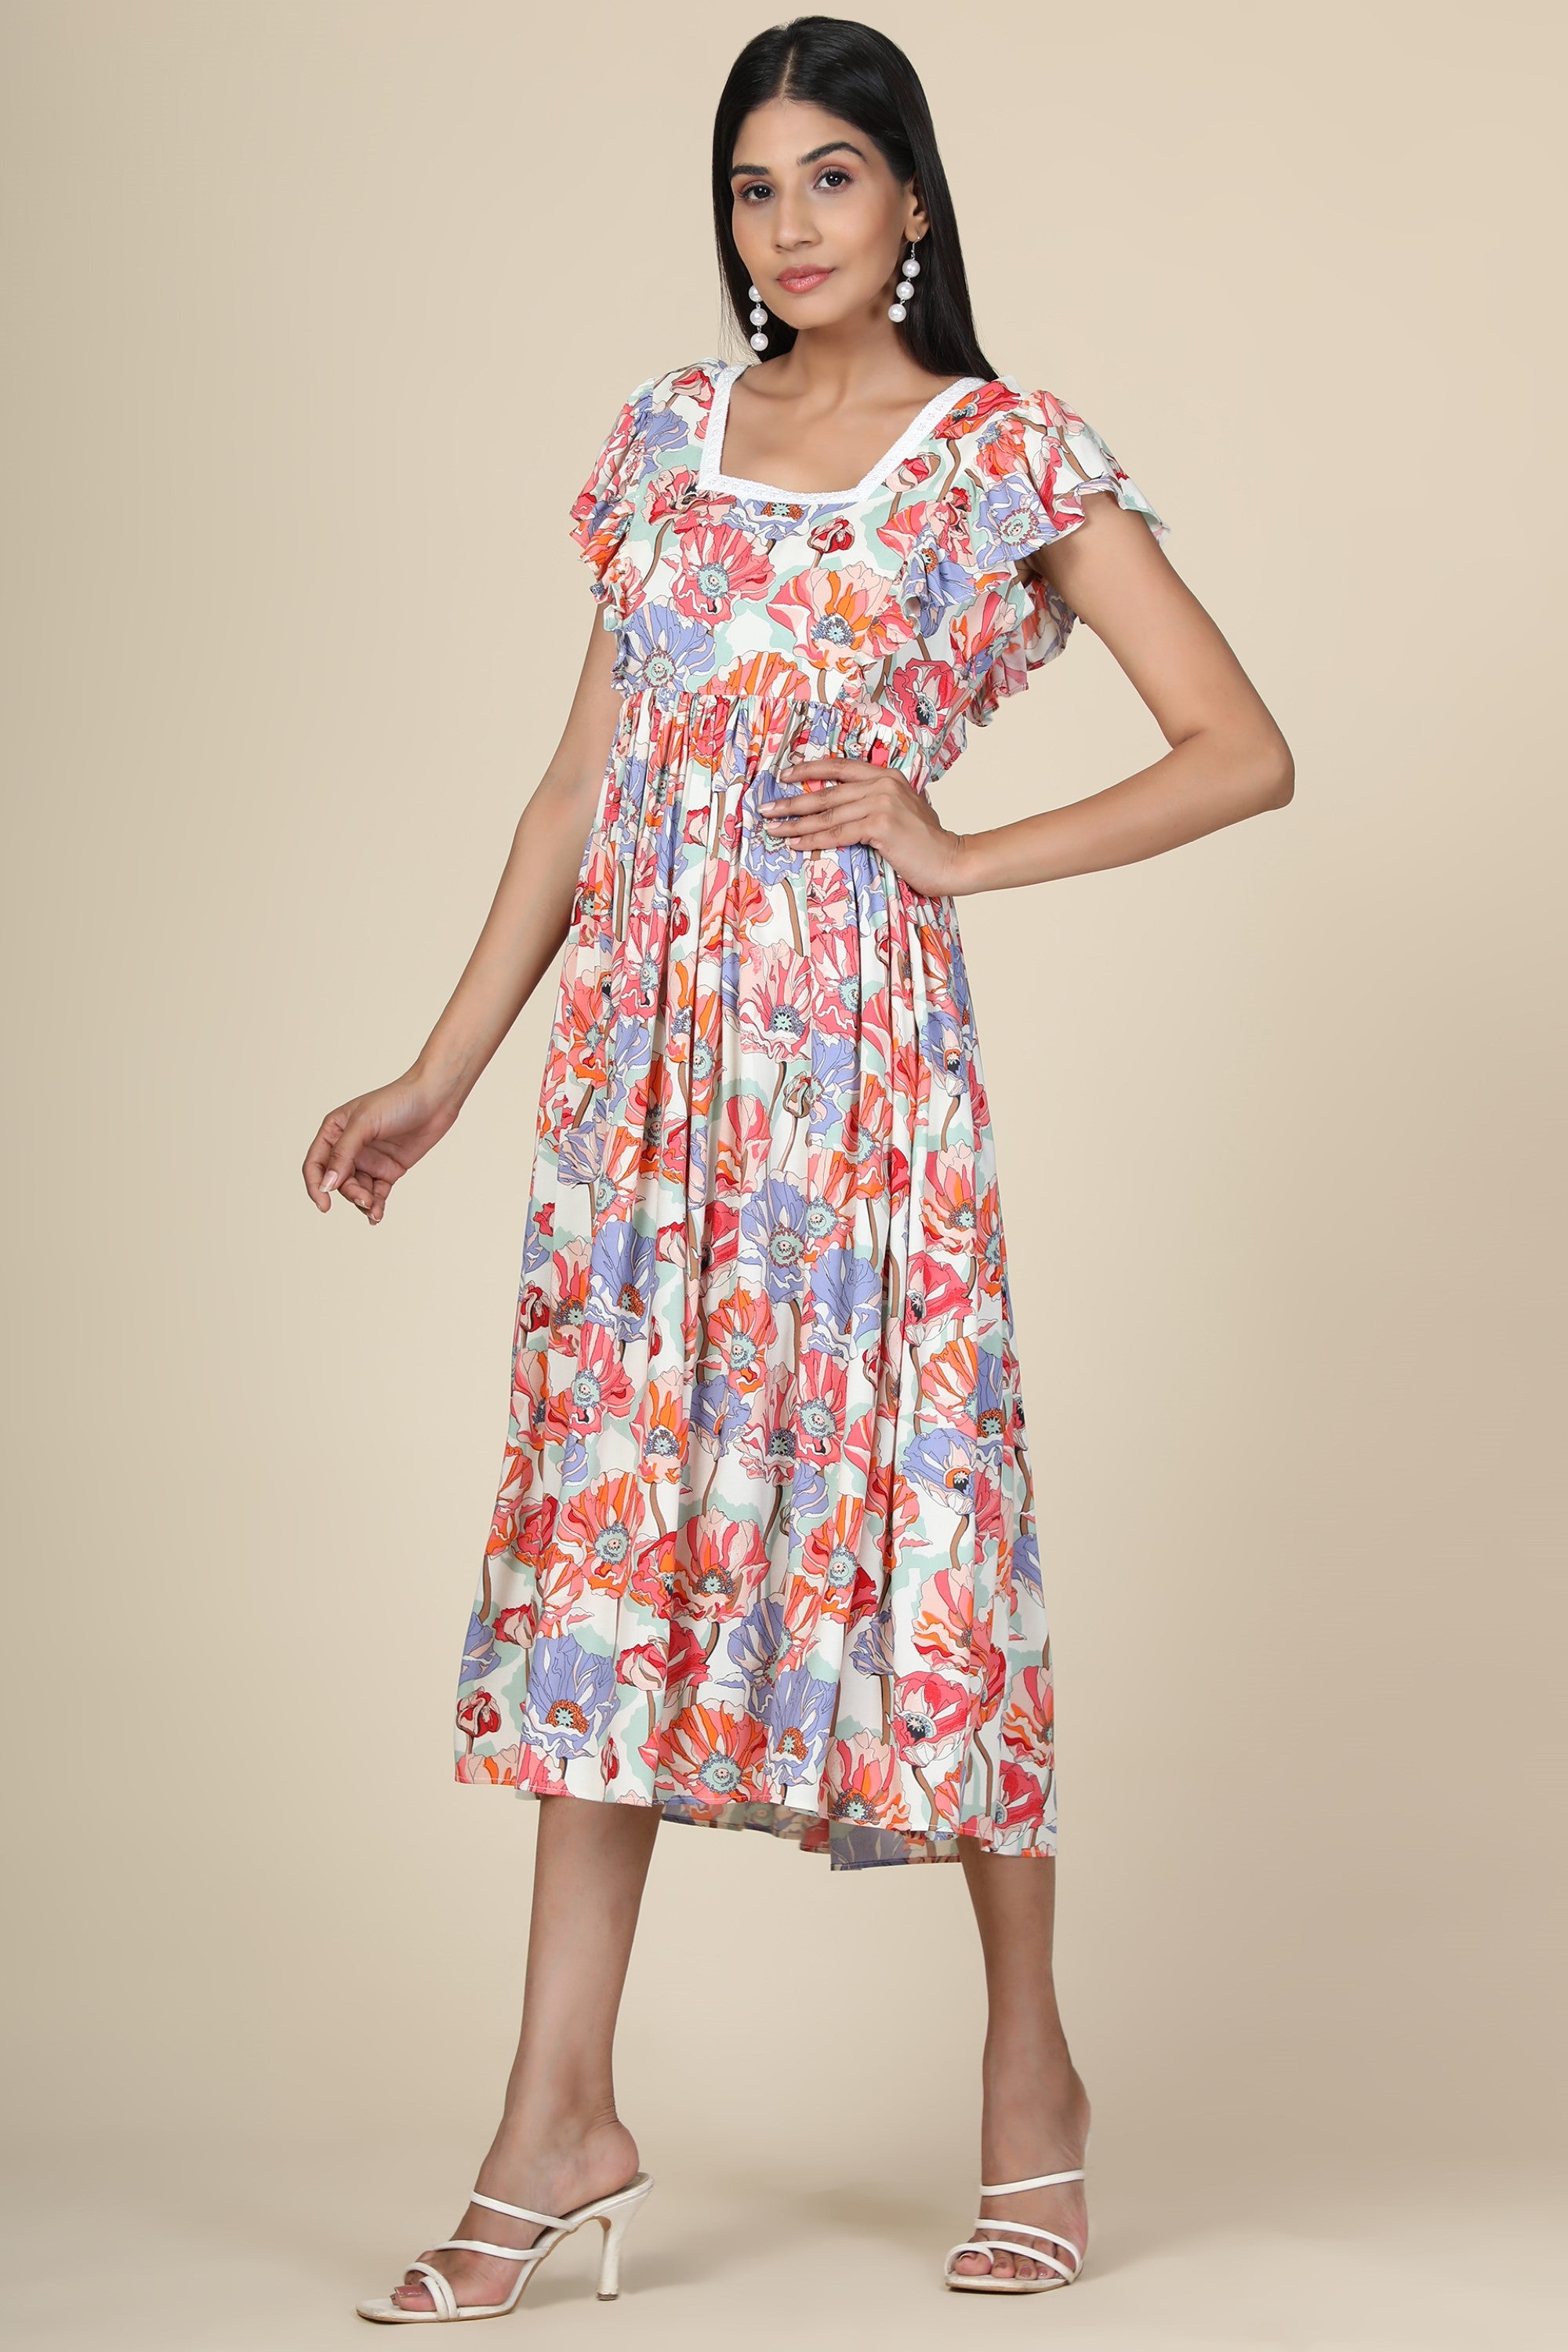 Women's Rayon Floral Dress With Ruffles At Yoke And Sleeves  - MIRACOLOS by Ruchi